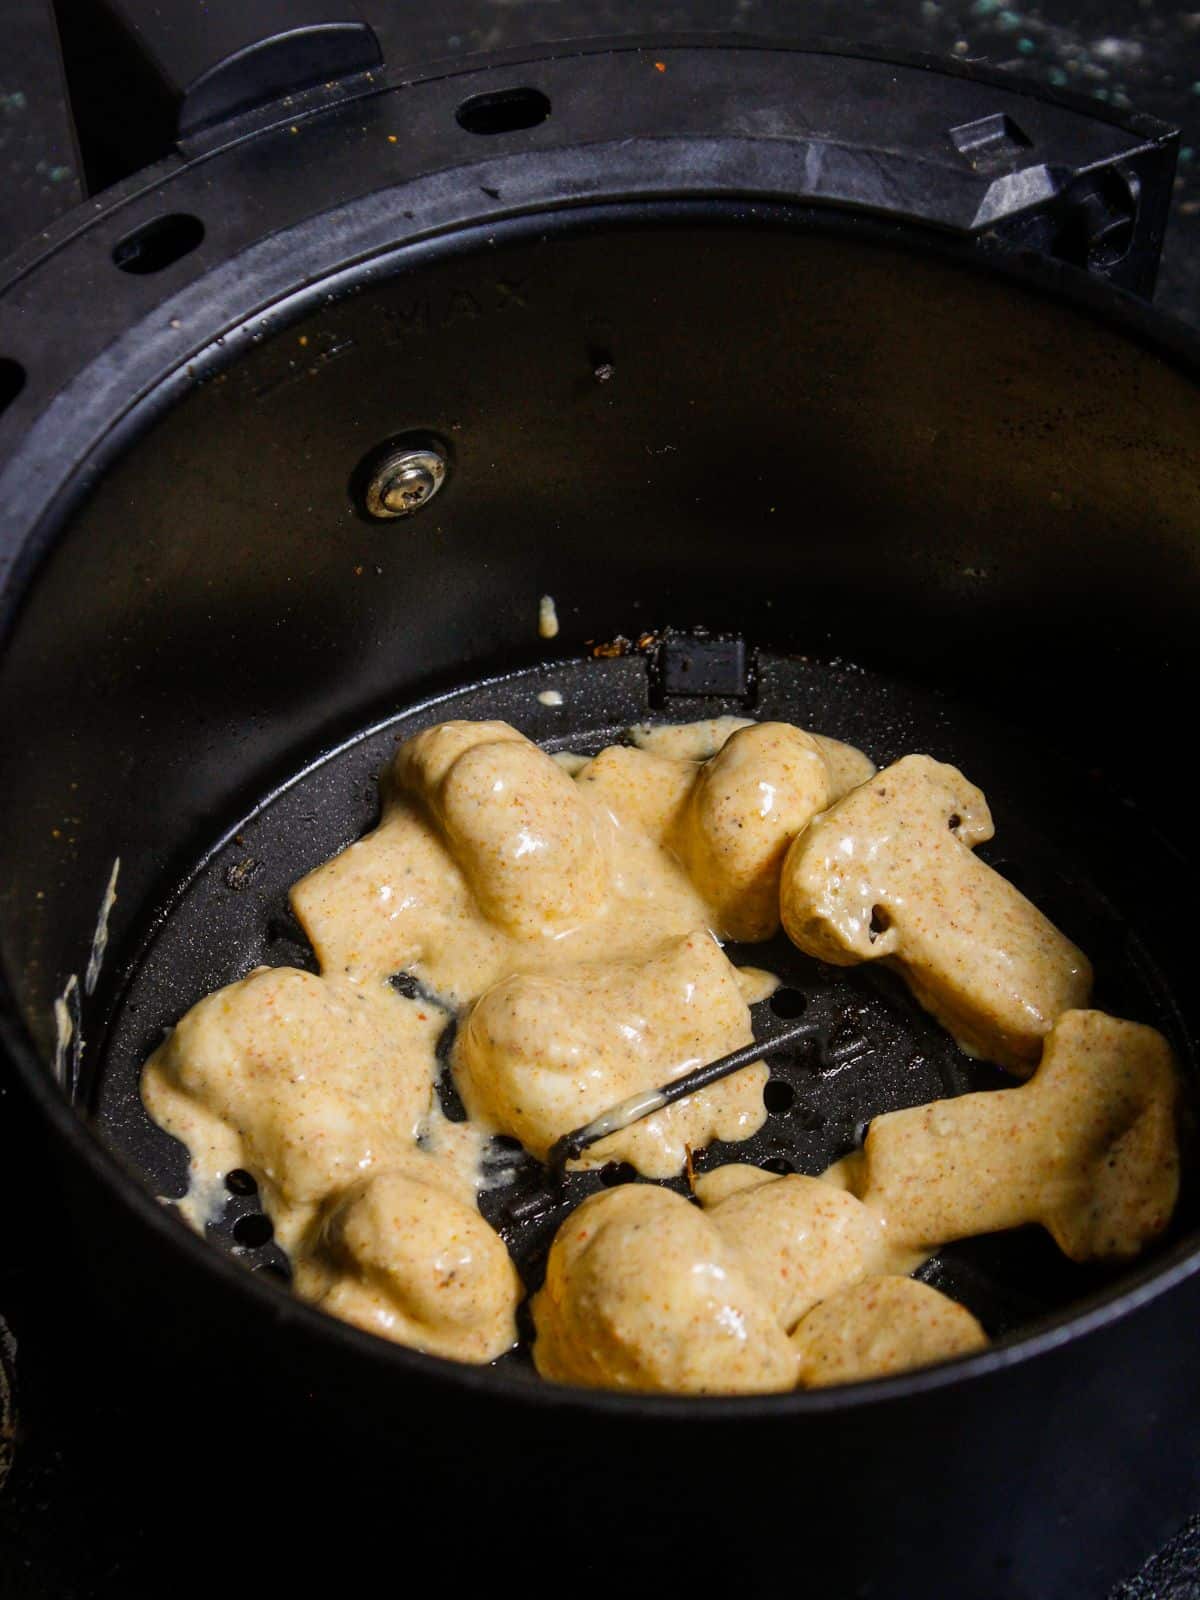 Transfer the mushrooms into air fryer and cook well